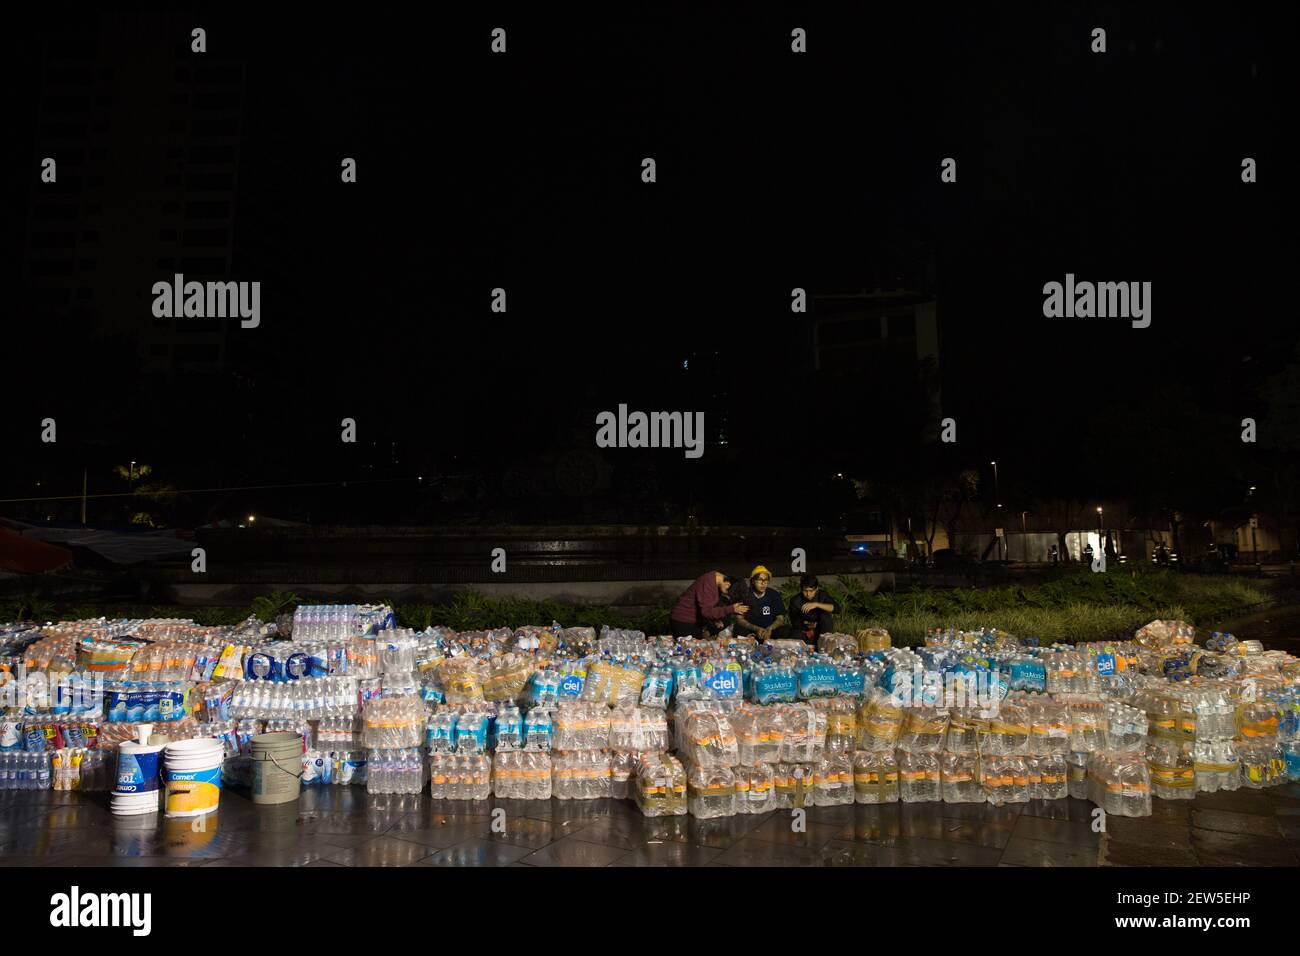 Volunteers organize bottled water and donated supplies at a collection point in Plaza de Cibeles in Mexico City, Mexico on September 21, 2017. On September 19, 2017, a 7.1 magnitude earthquake rocked Central Mexico, killing more than 200 hundreds people and causing serious damage to buildings in the capital. The worst earthquake in the history of Mexico occurred on September 19, 1985, killing nearly 10,000 people. (Photo by Bénédicte Desrus/Sipa USA) Stock Photo